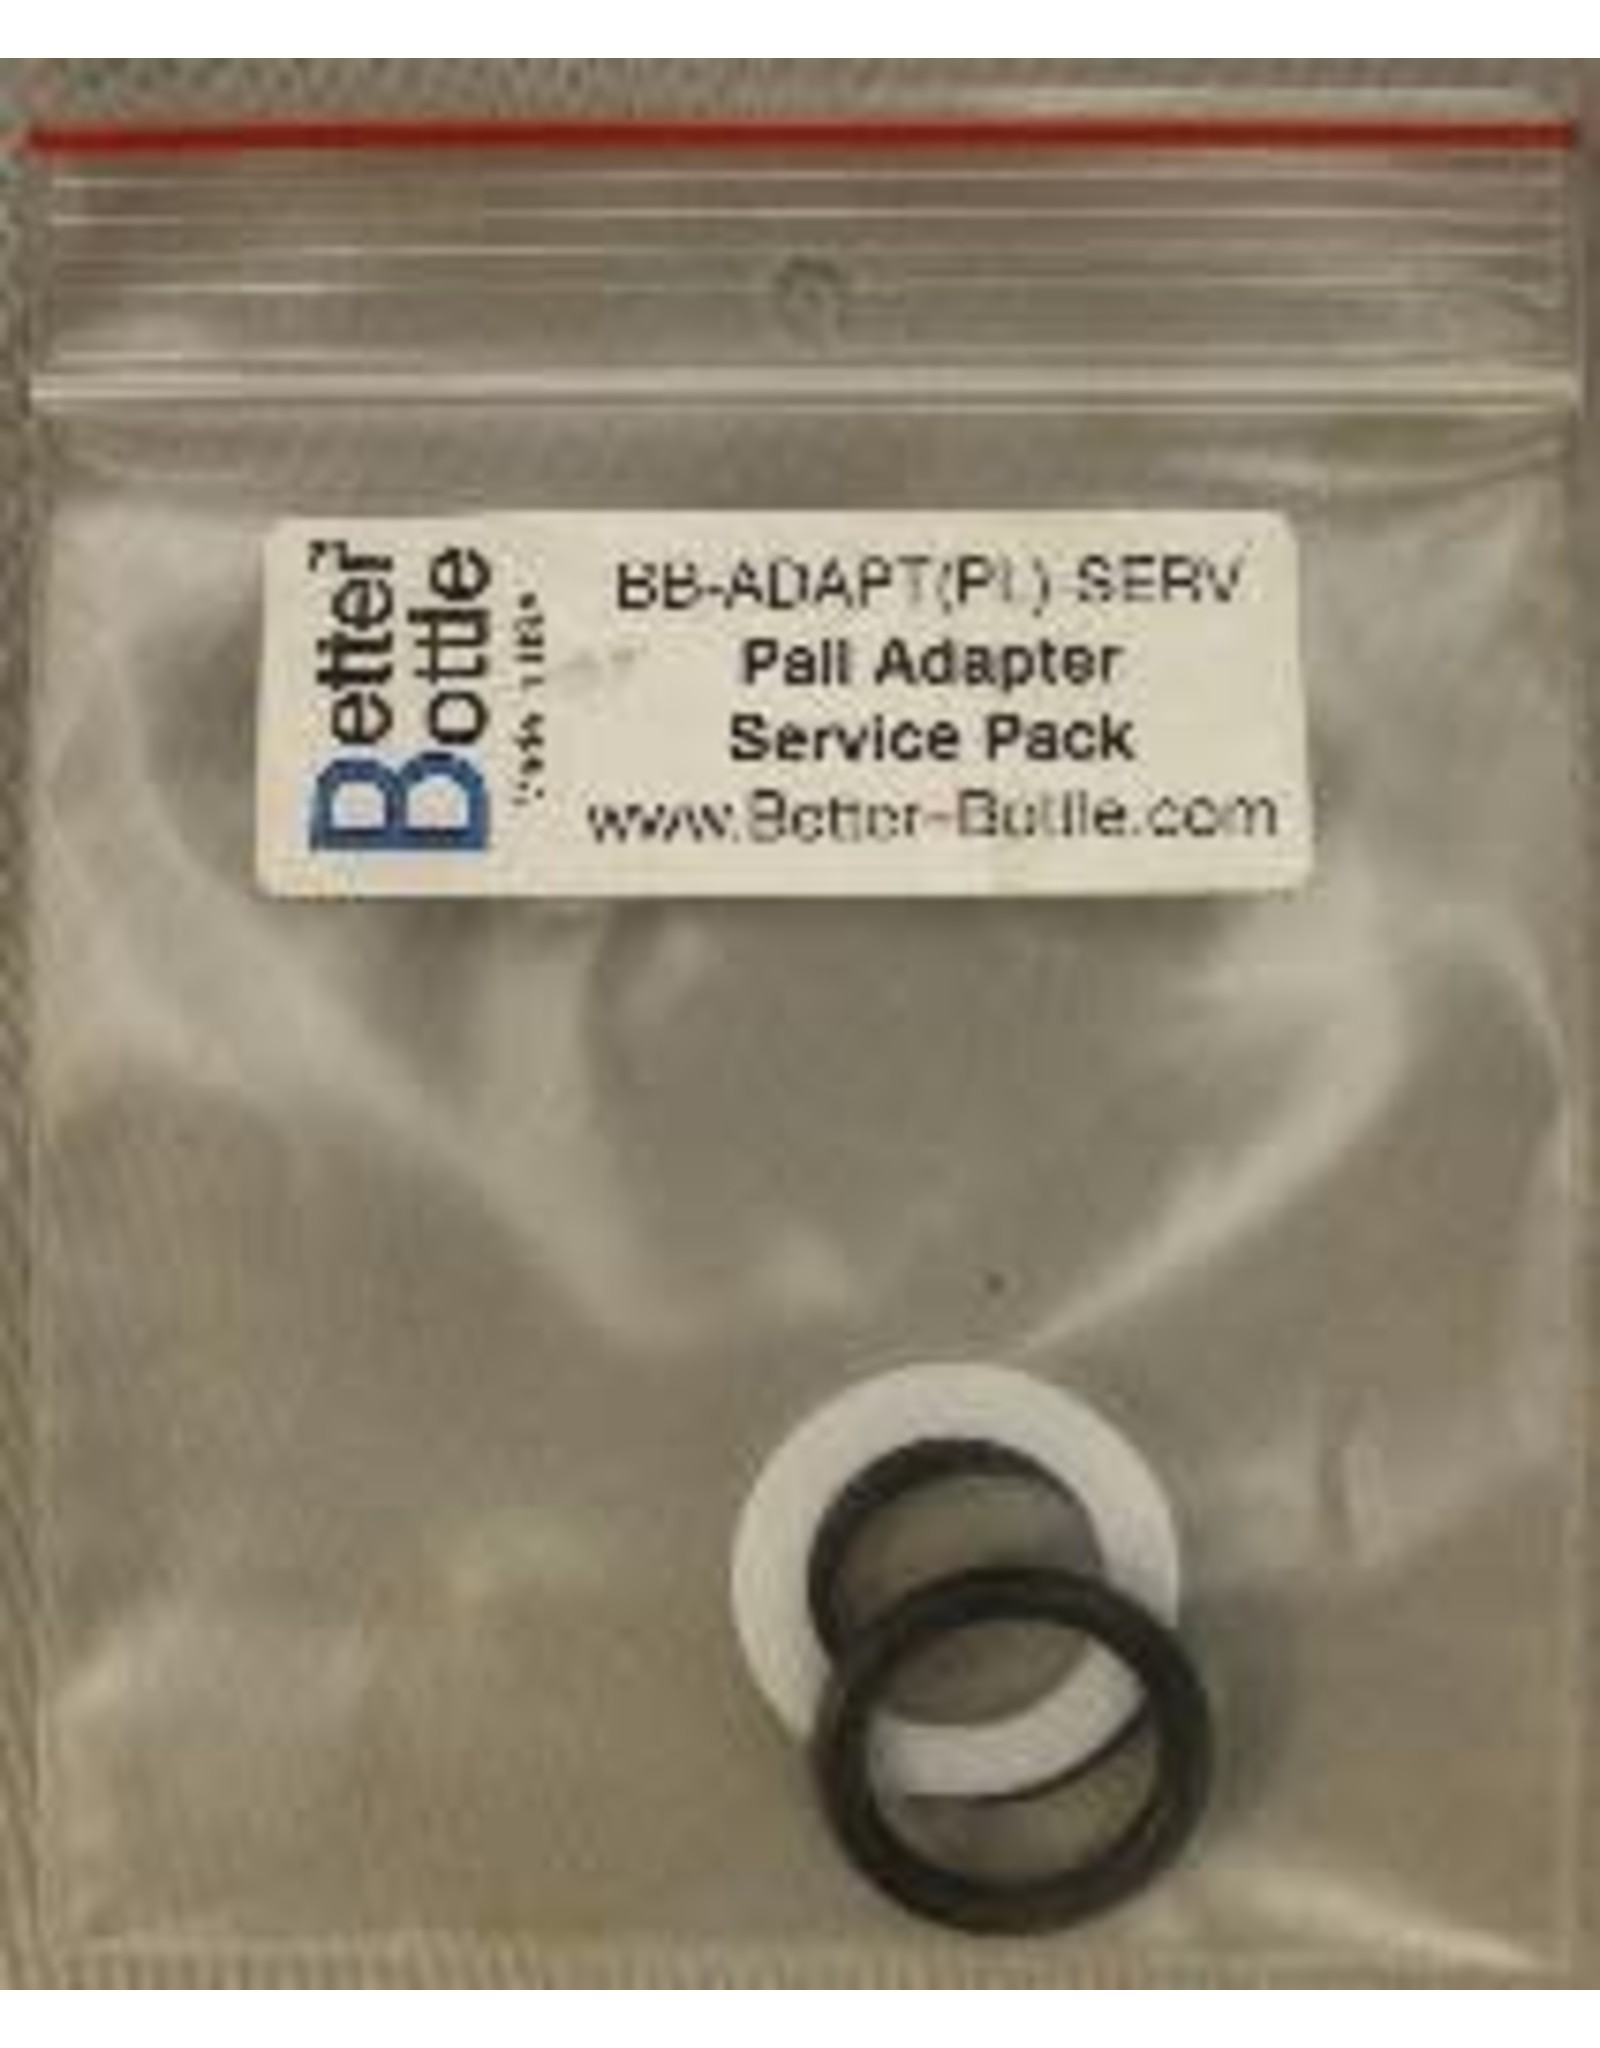 SERVICE KIT FOR PAIL ADAPTER